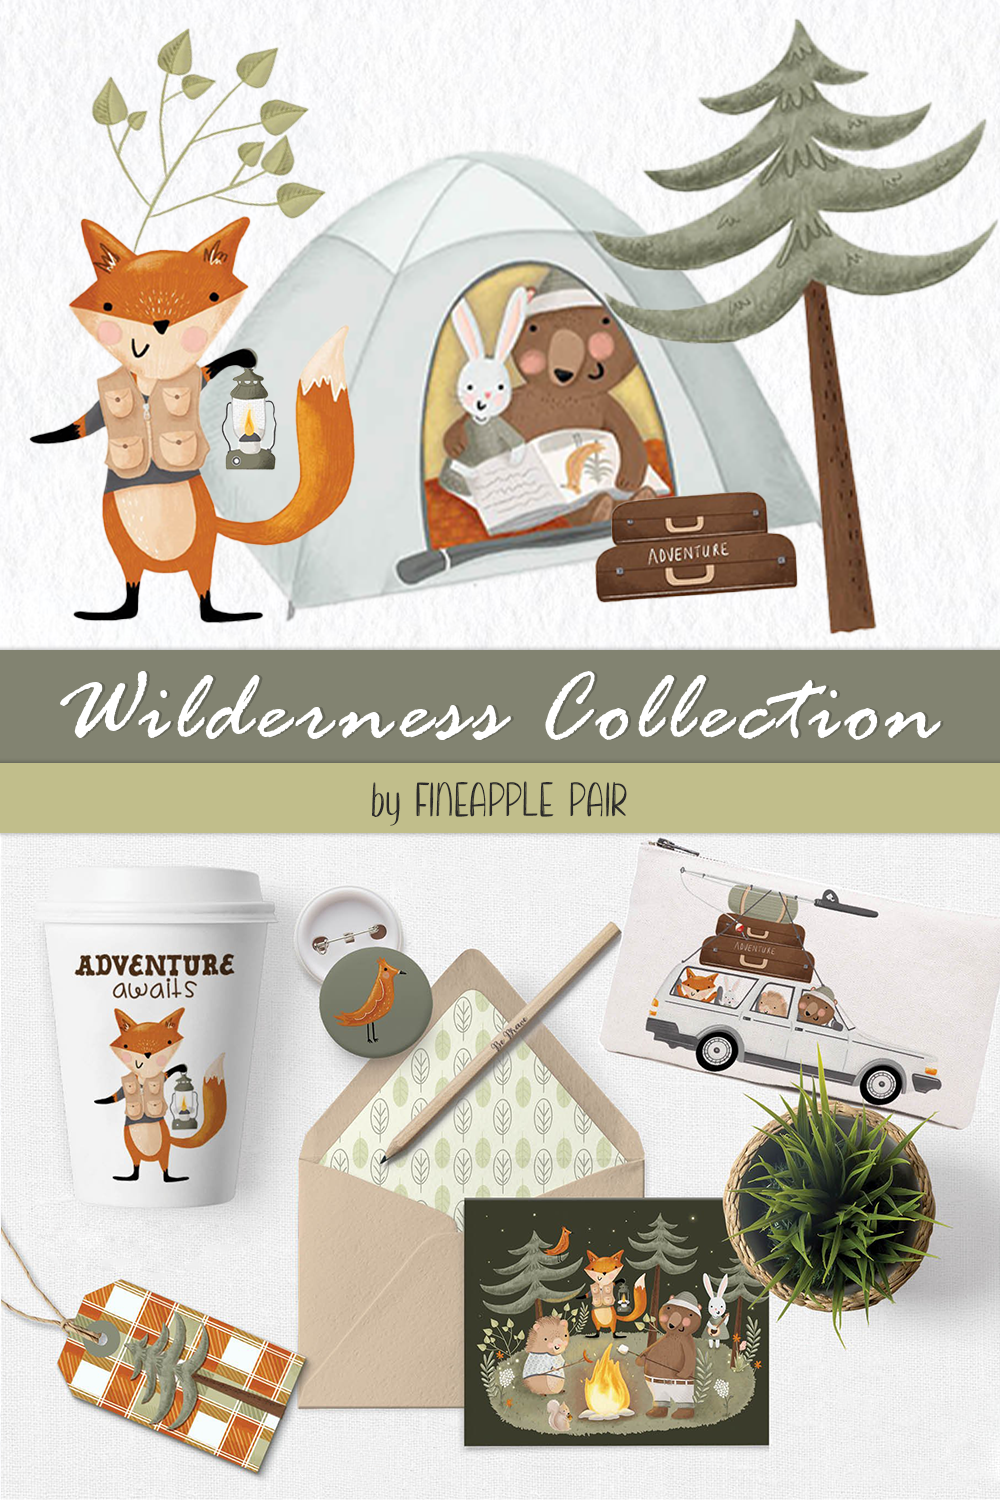 Wilderness collection of pinterest.